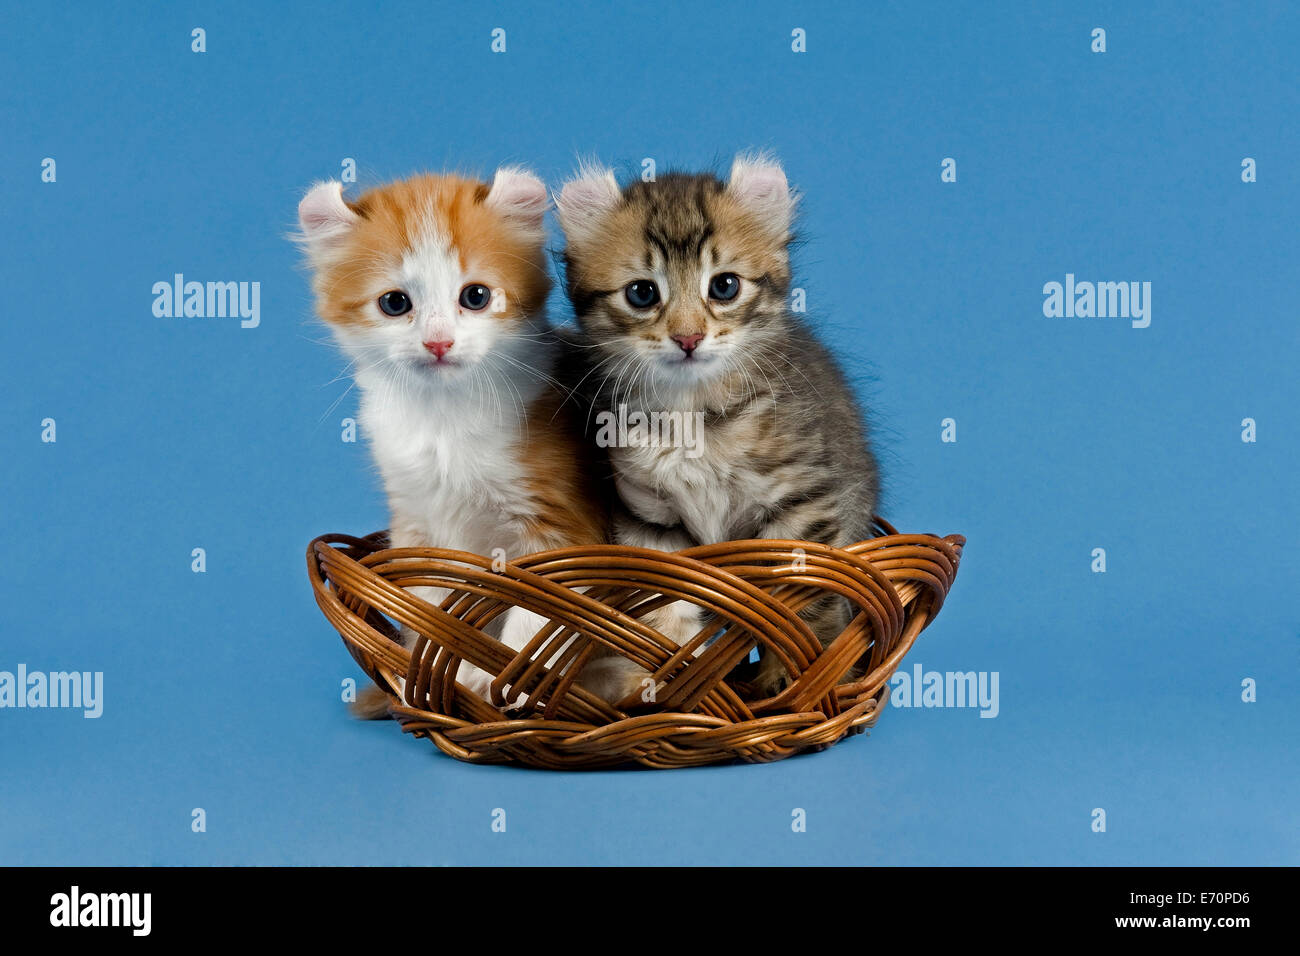 Pedigree cats, American Curl, cat breed, two kittens in a basket Stock Photo